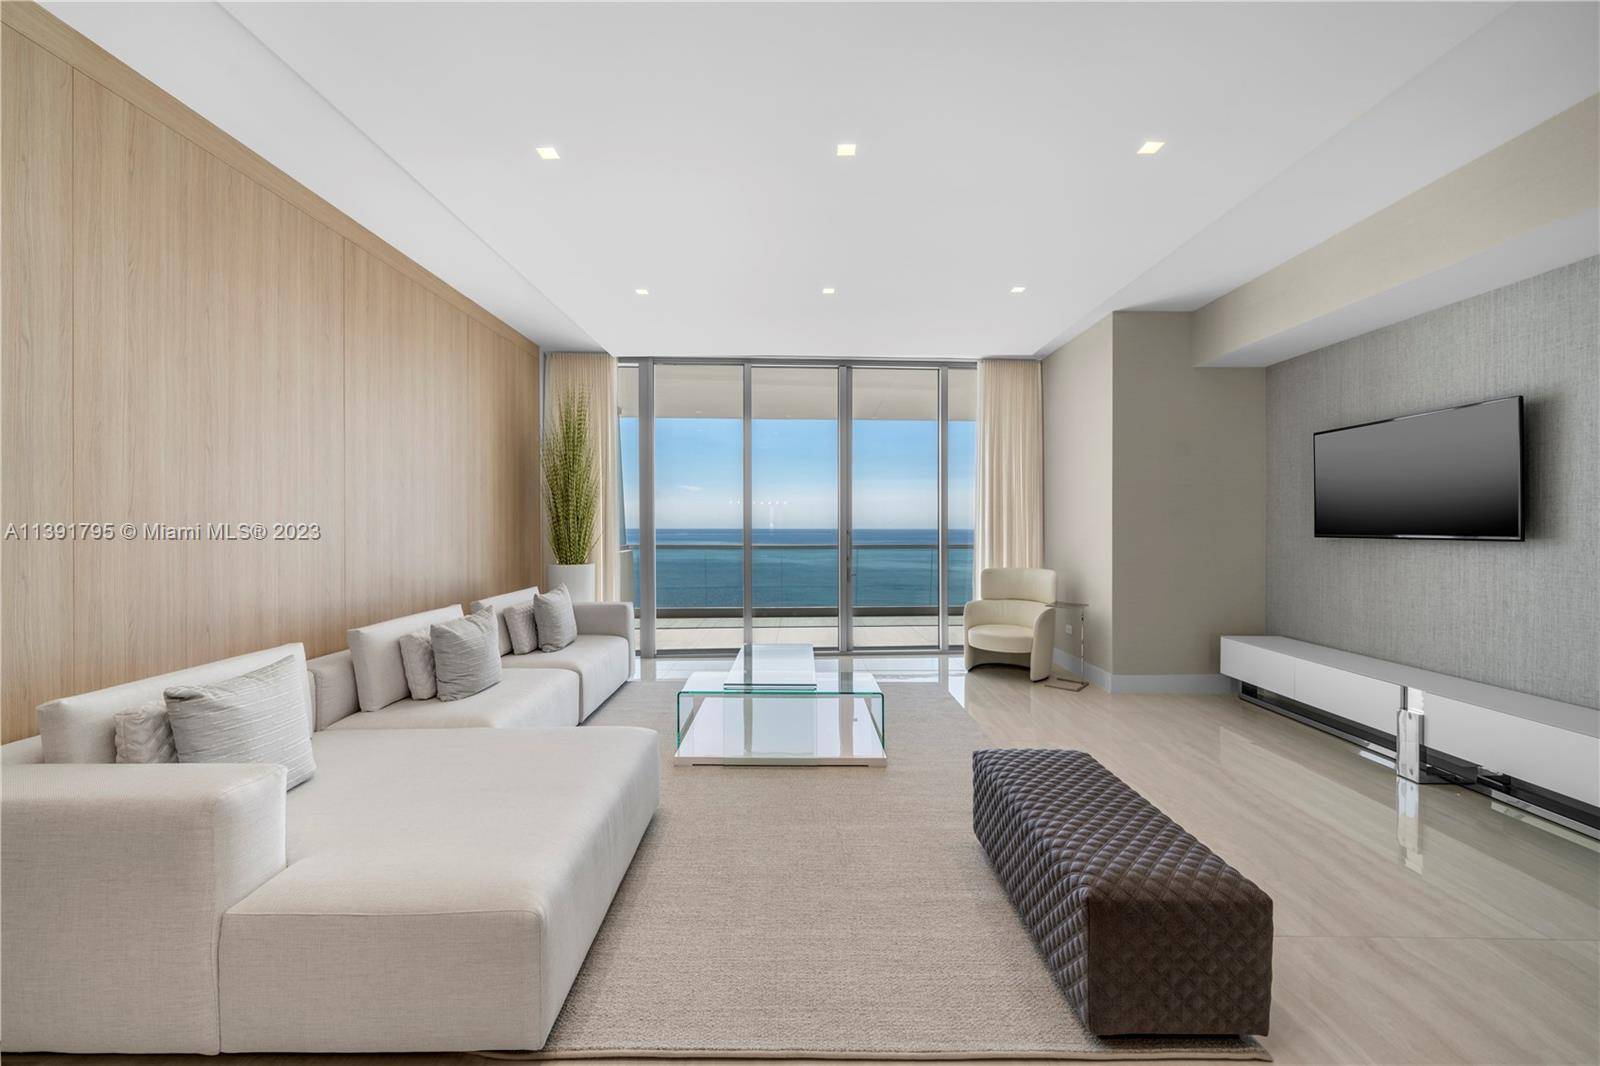 Stunning 3 bed flow through residence in Turnberry Ocean Club.